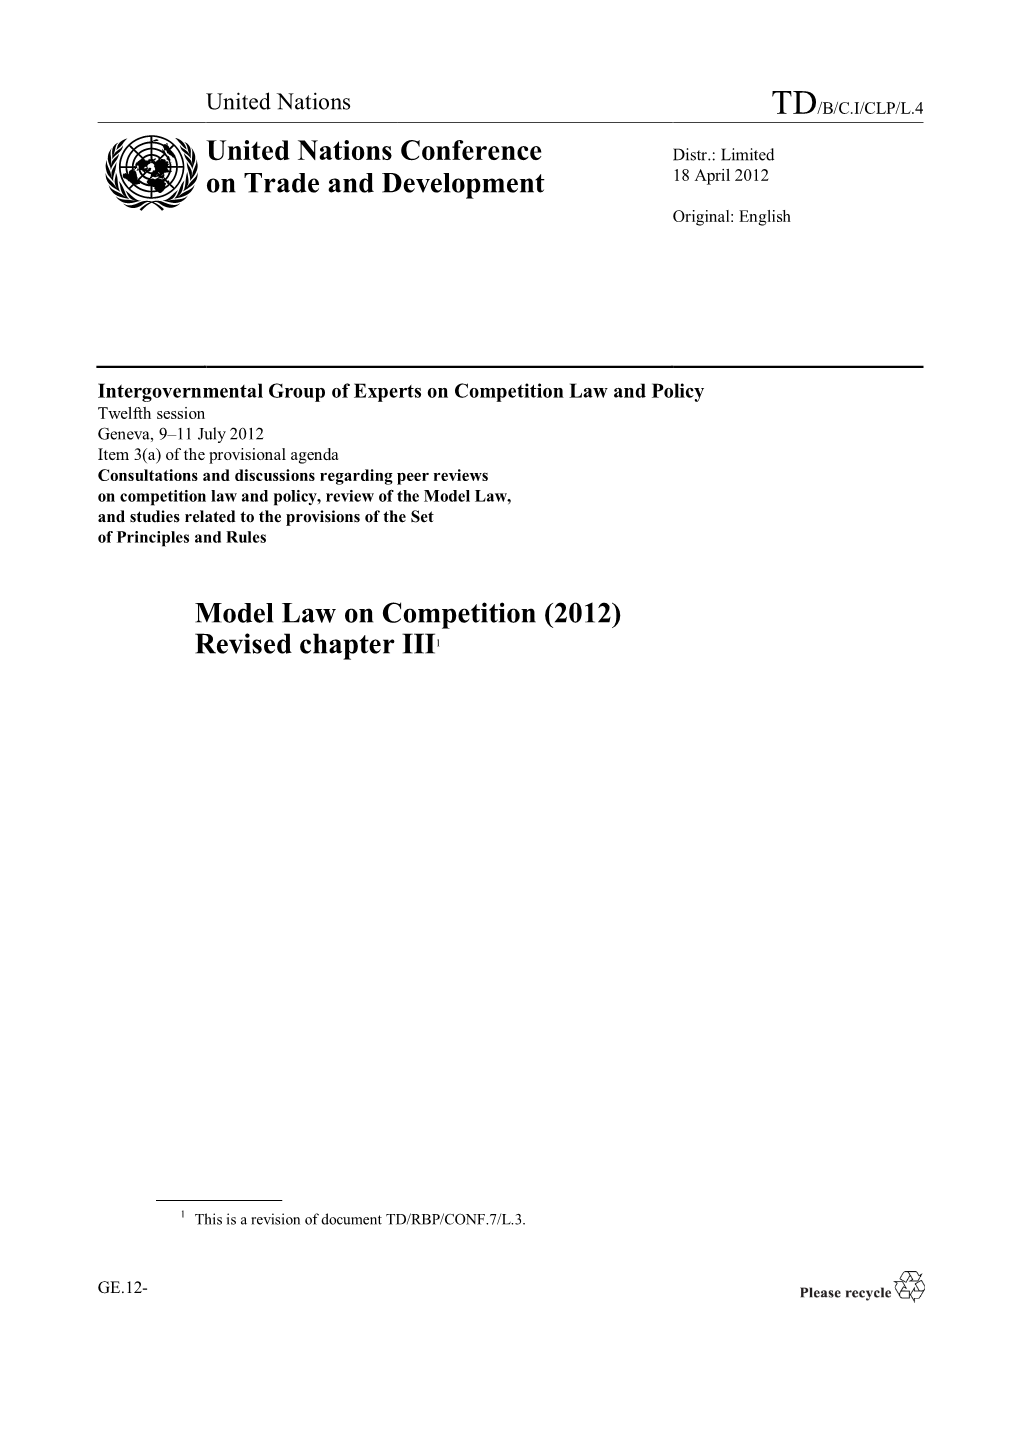 Model Law on Competition (2012) Revised Chapter III1